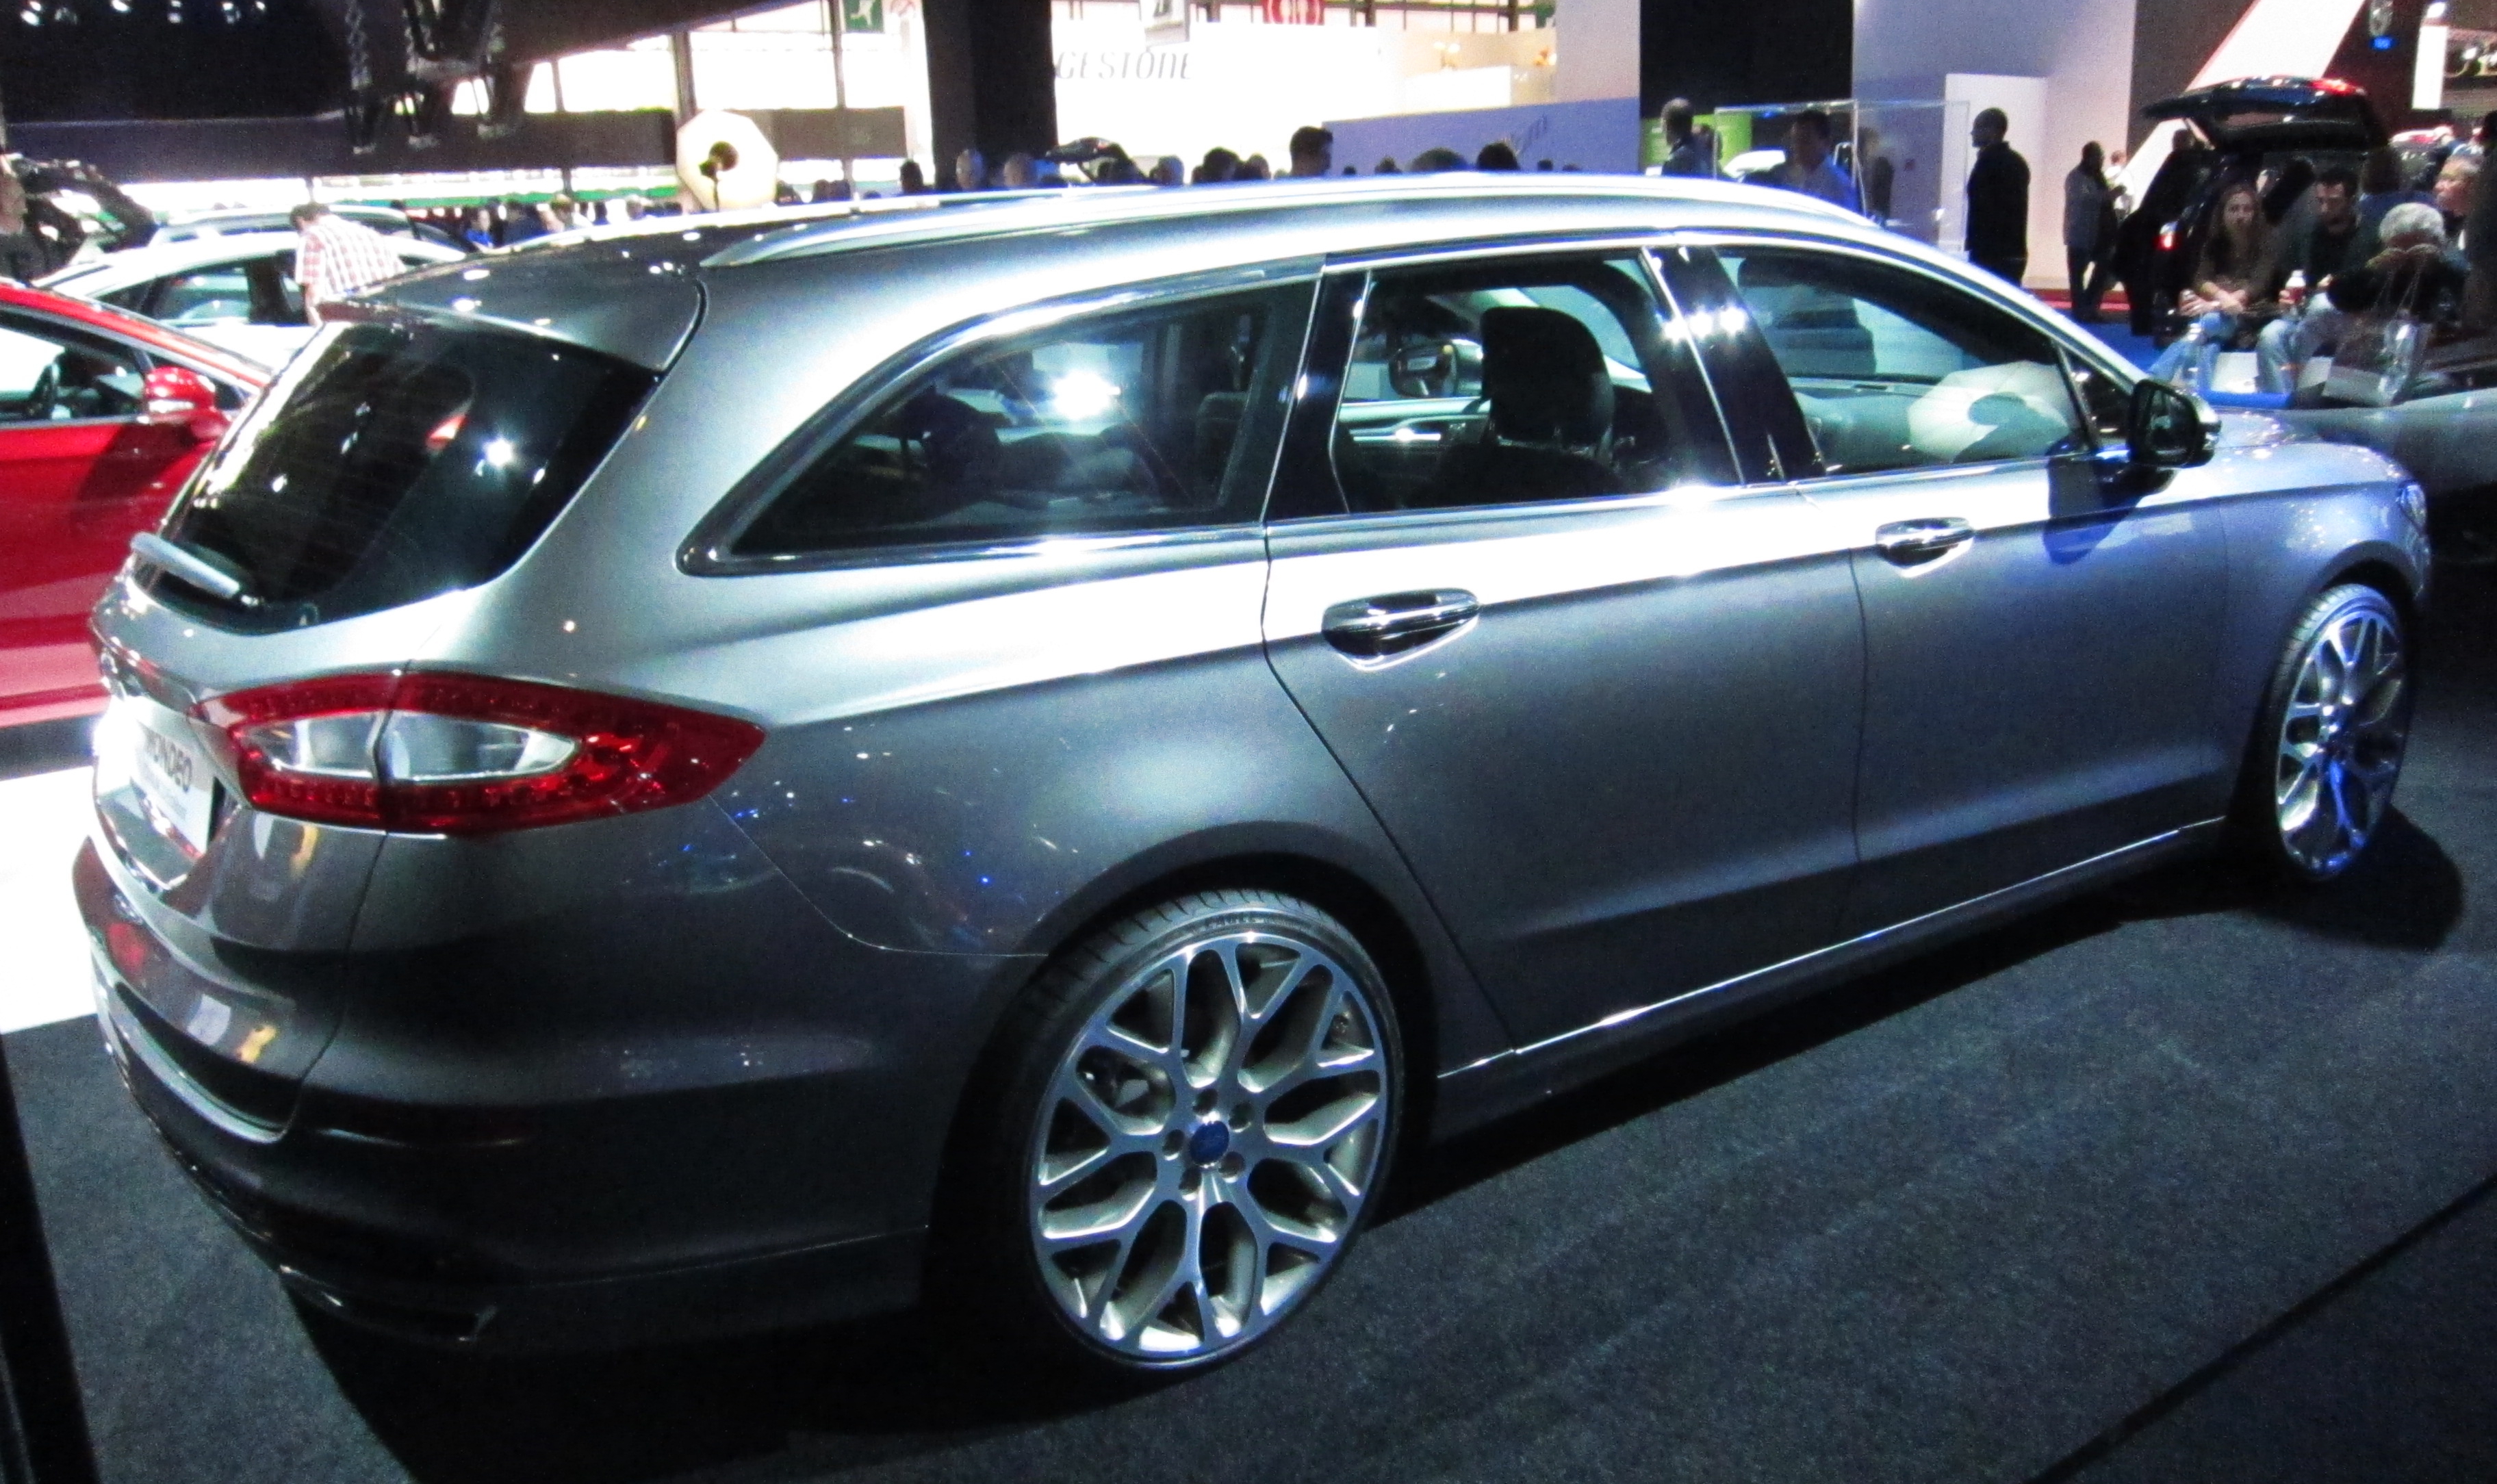 Brilliance BS4 Wagon exterior specifications